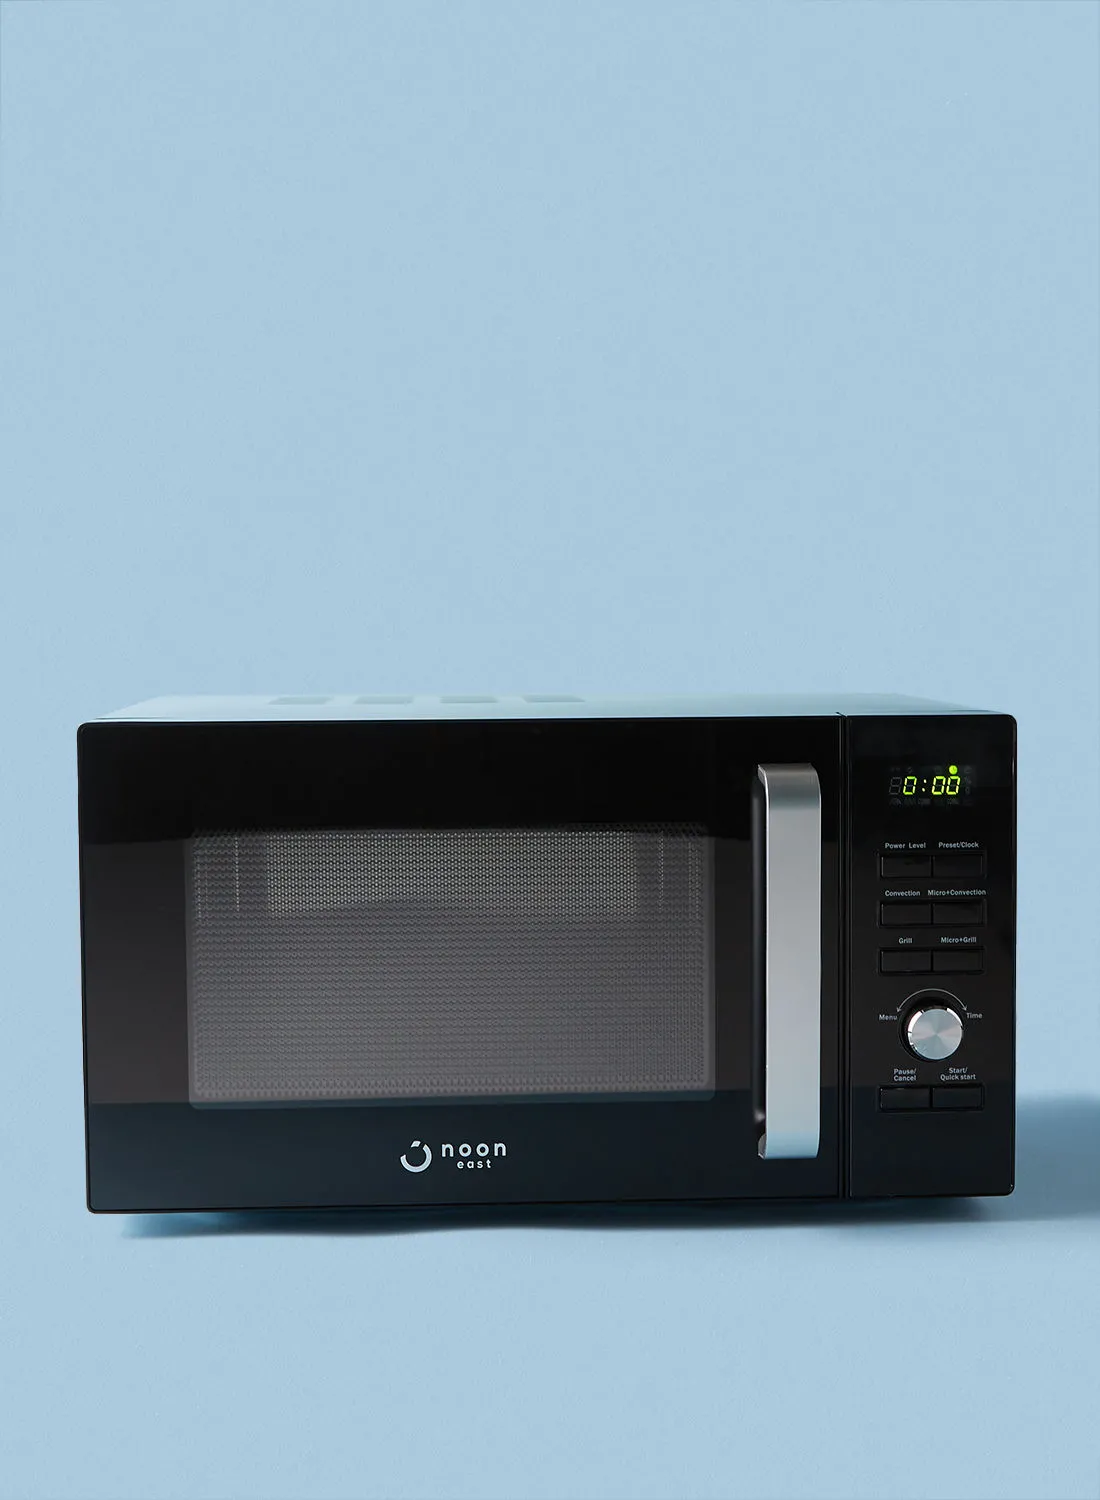 noon east Digital Electric Convection Microwave Oven - 30 Liter 900 W With 13 Auto Cook Menu, Grill, Defrost And Child Lock- Black